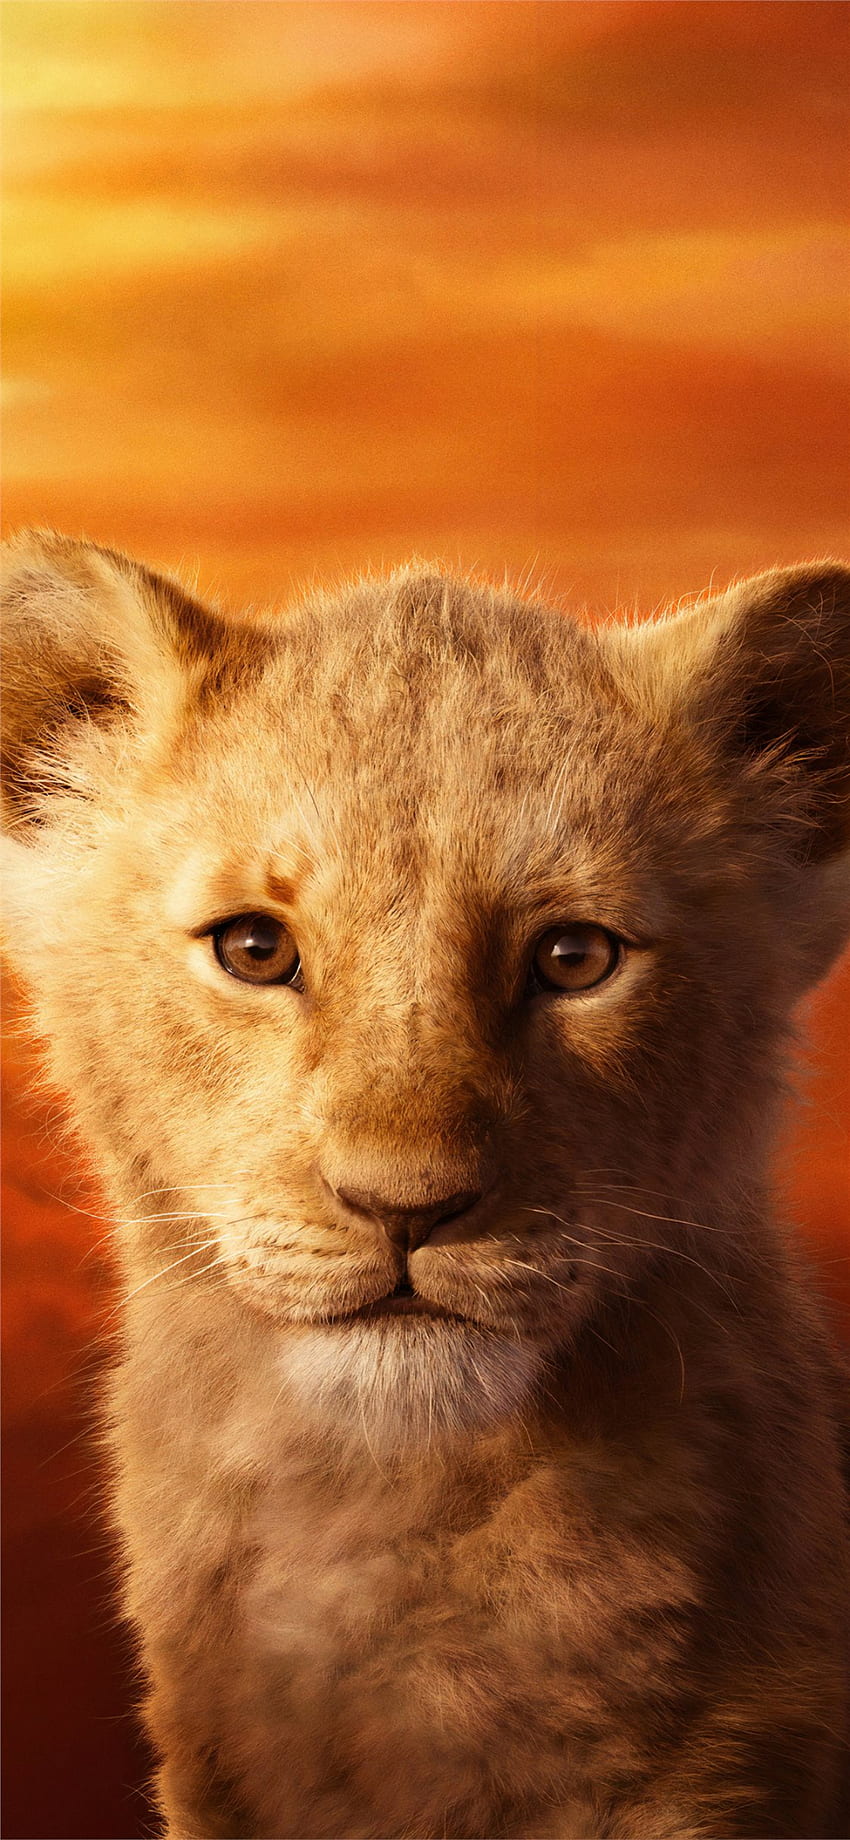 jd mccrary as simba the lion king 2019 iPhone X wallpaper ponsel HD